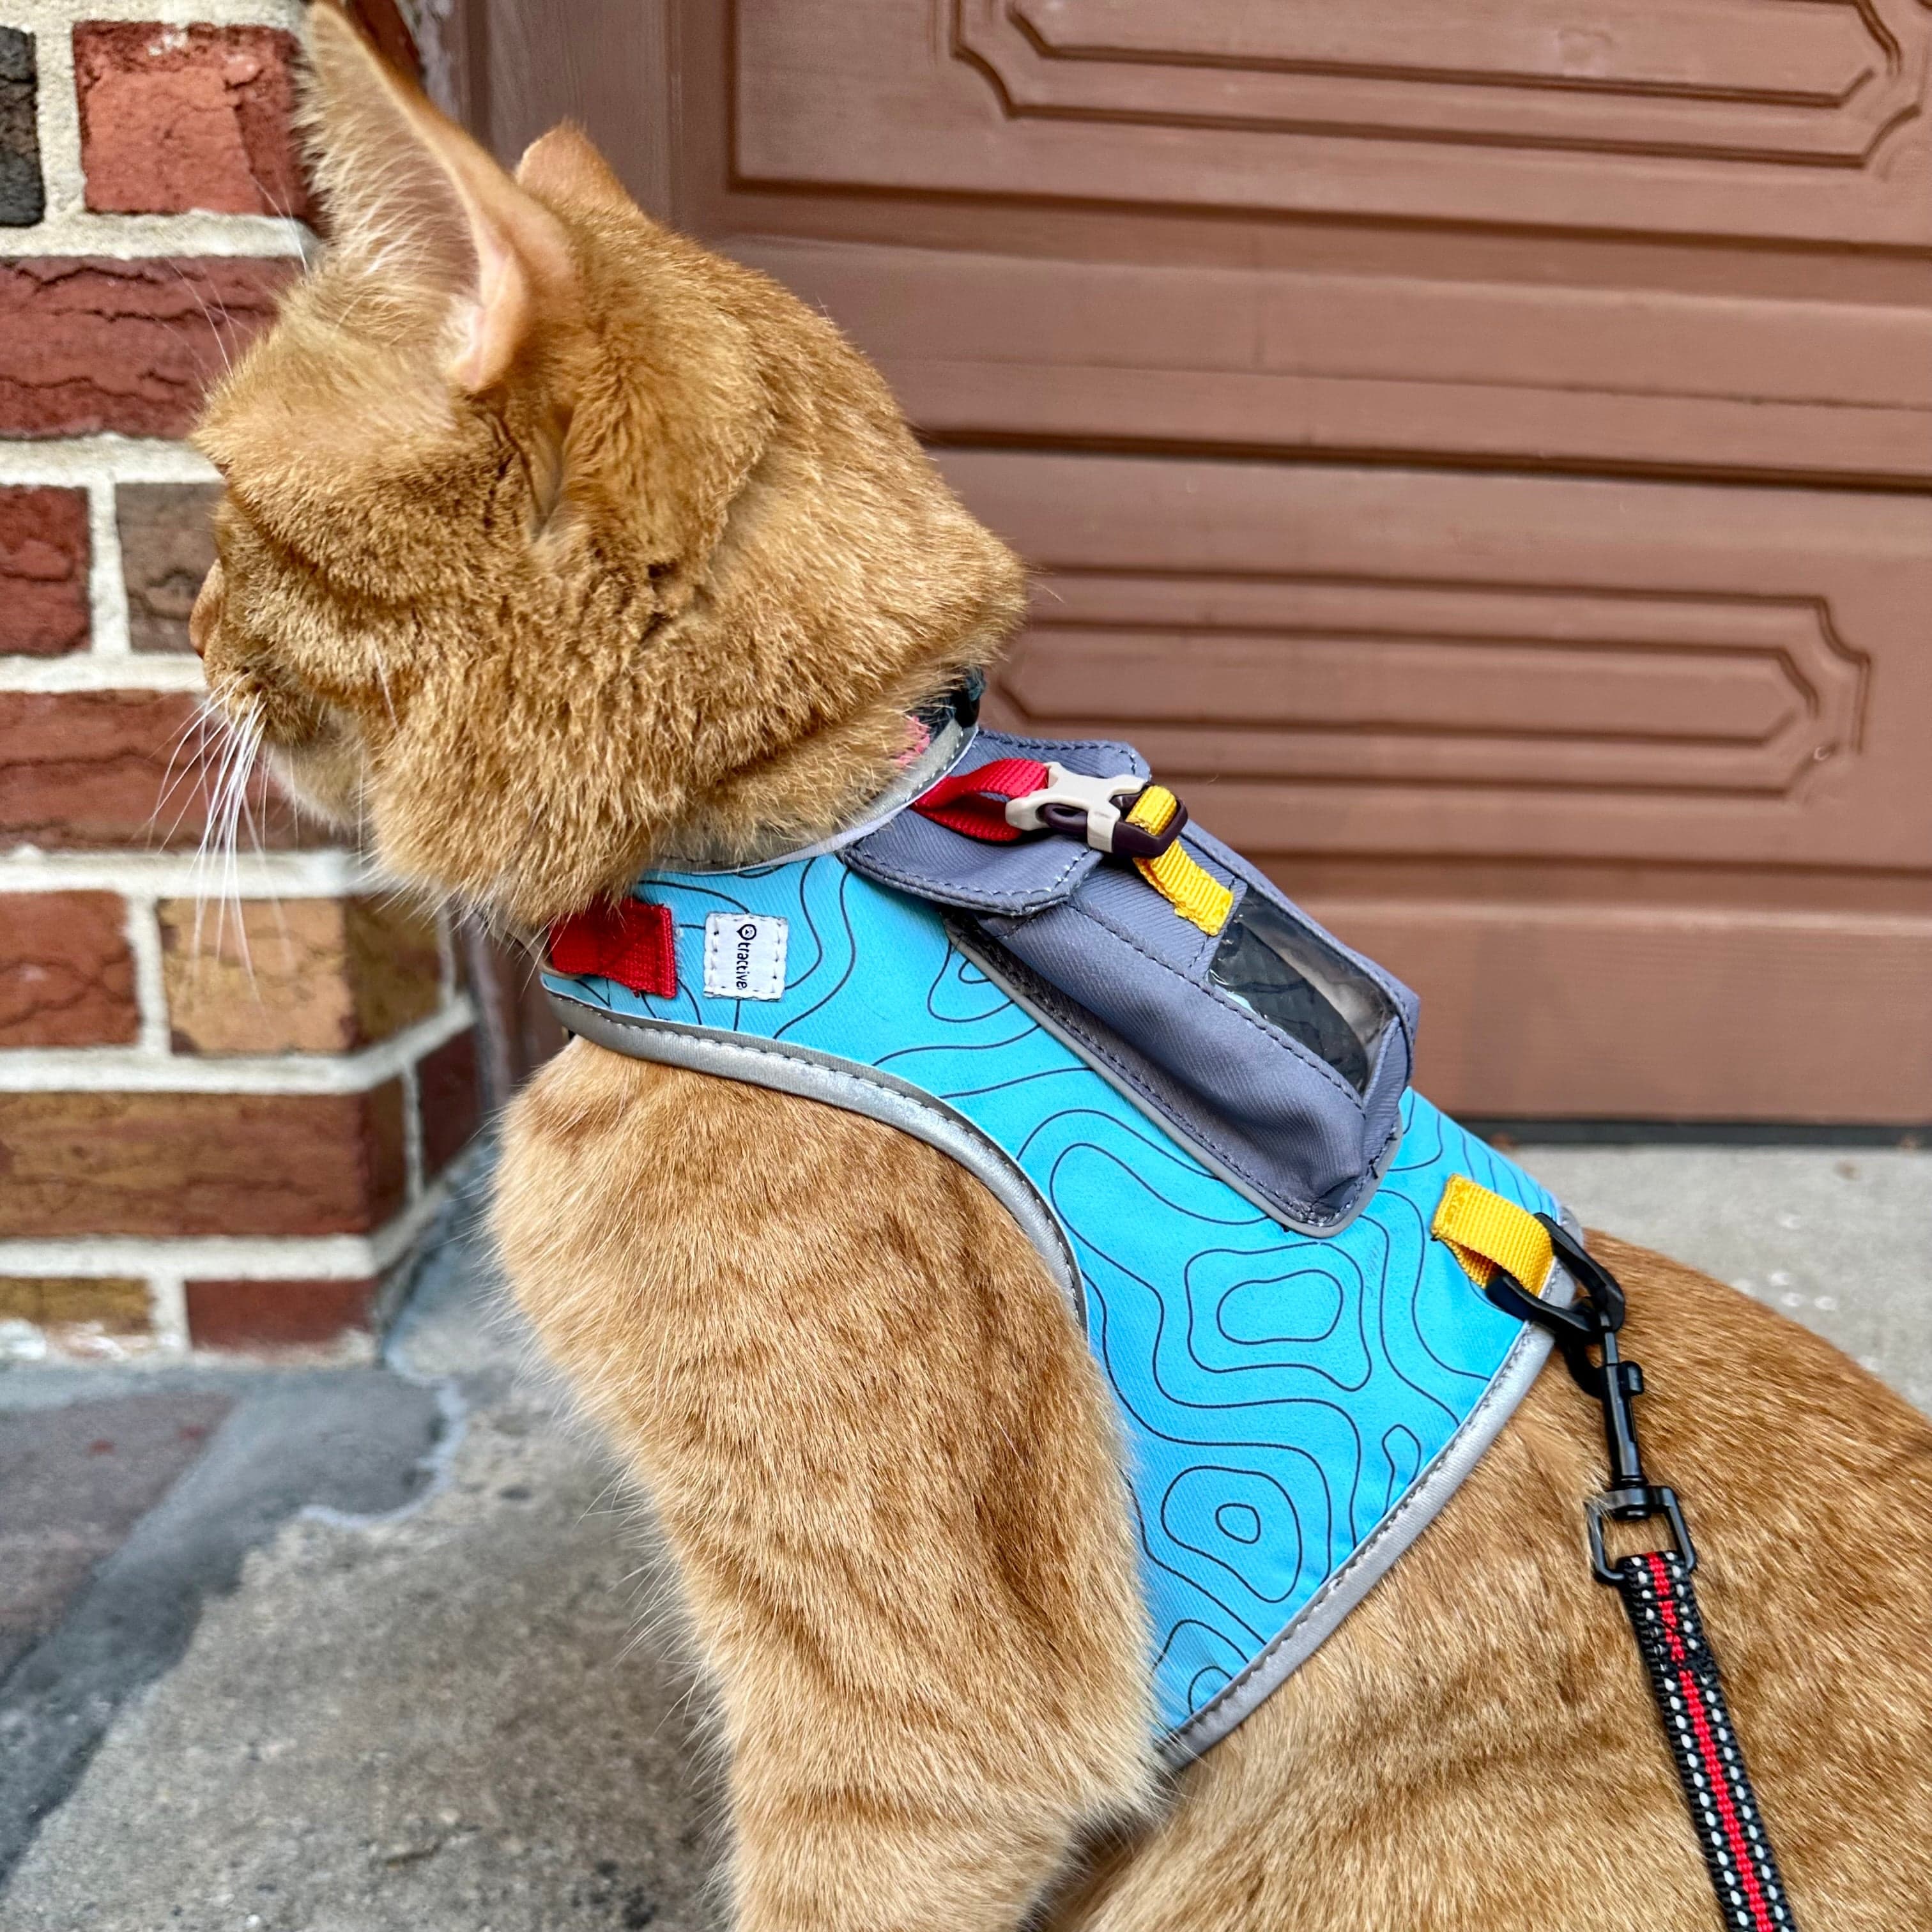 "The Pathfinder" Cat Harness & Tractive GPS Device Bundle